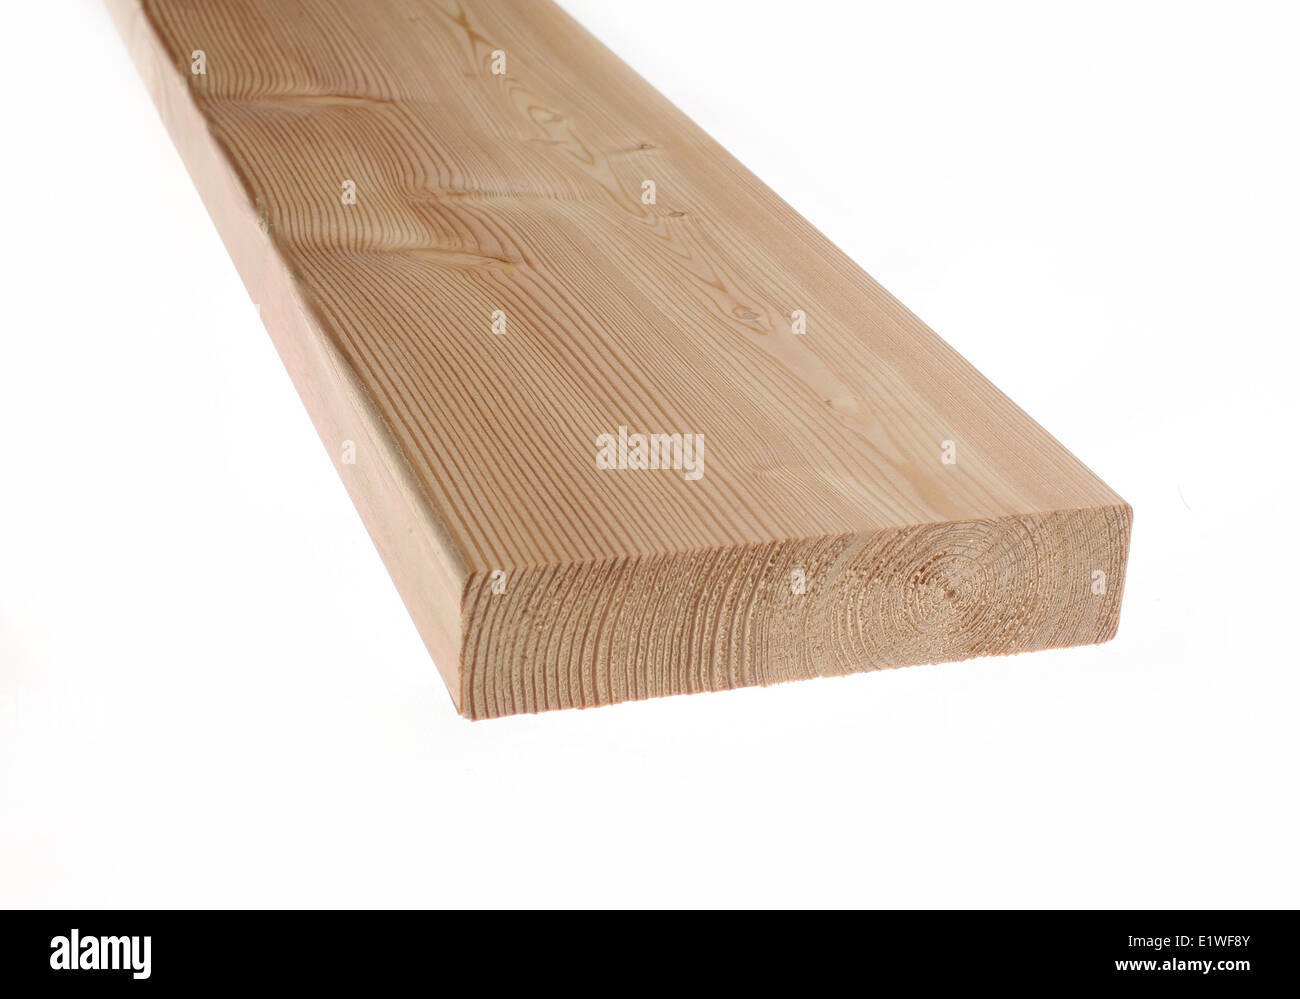 Clean freshly cut wooden plank Stock Photo